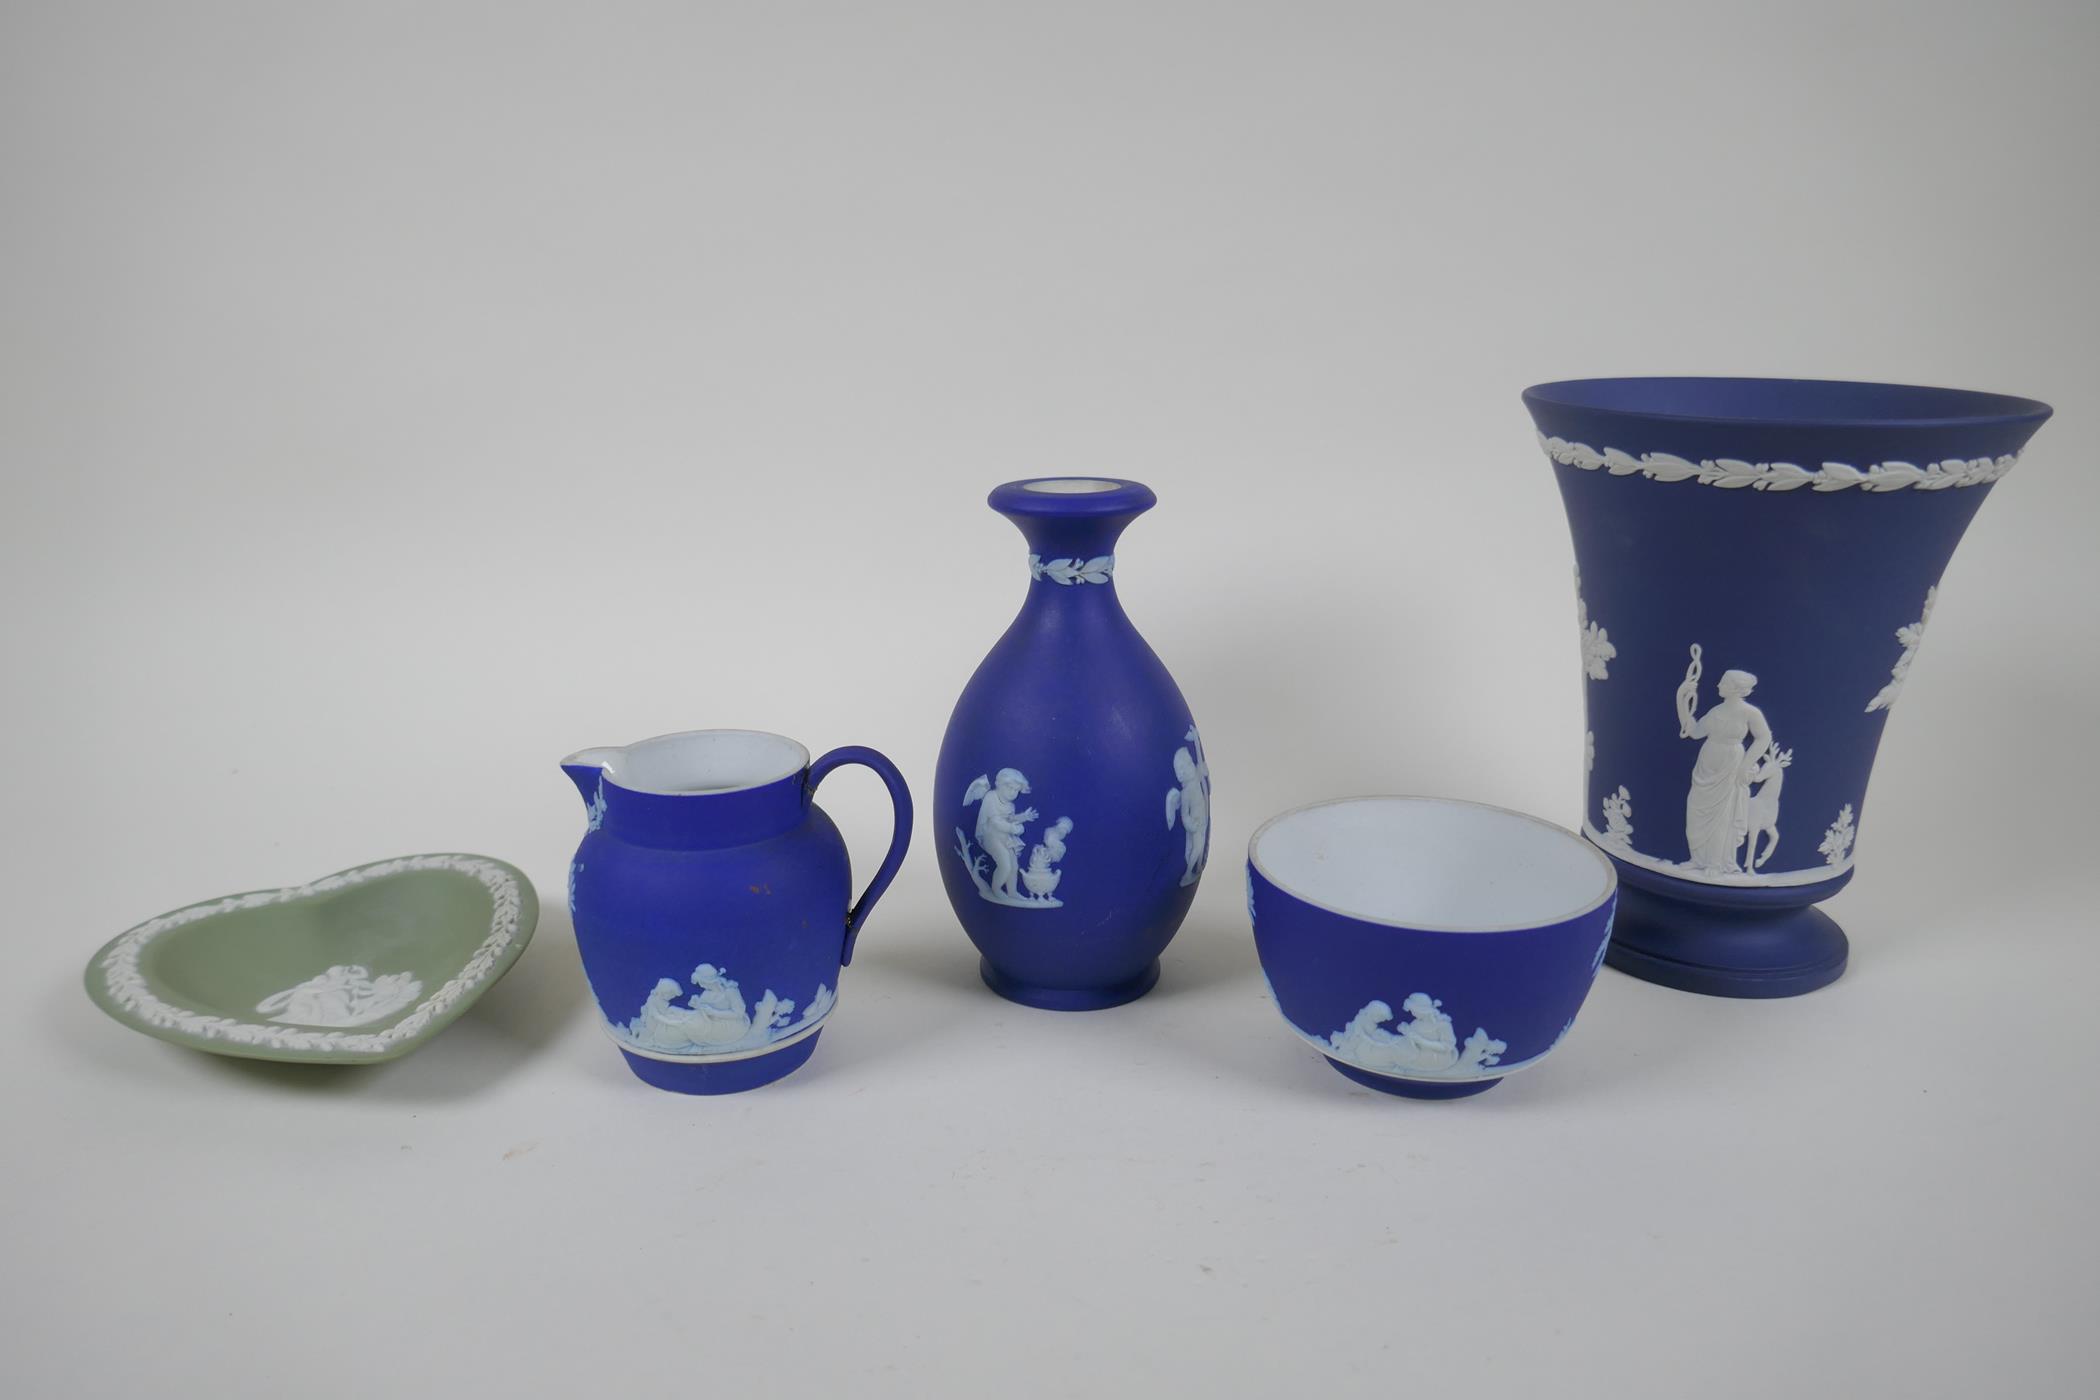 A collection of Antique Wedgwood Jasperware including a teapot, jugs, saucers, vases etc, AF, teapot - Image 8 of 8